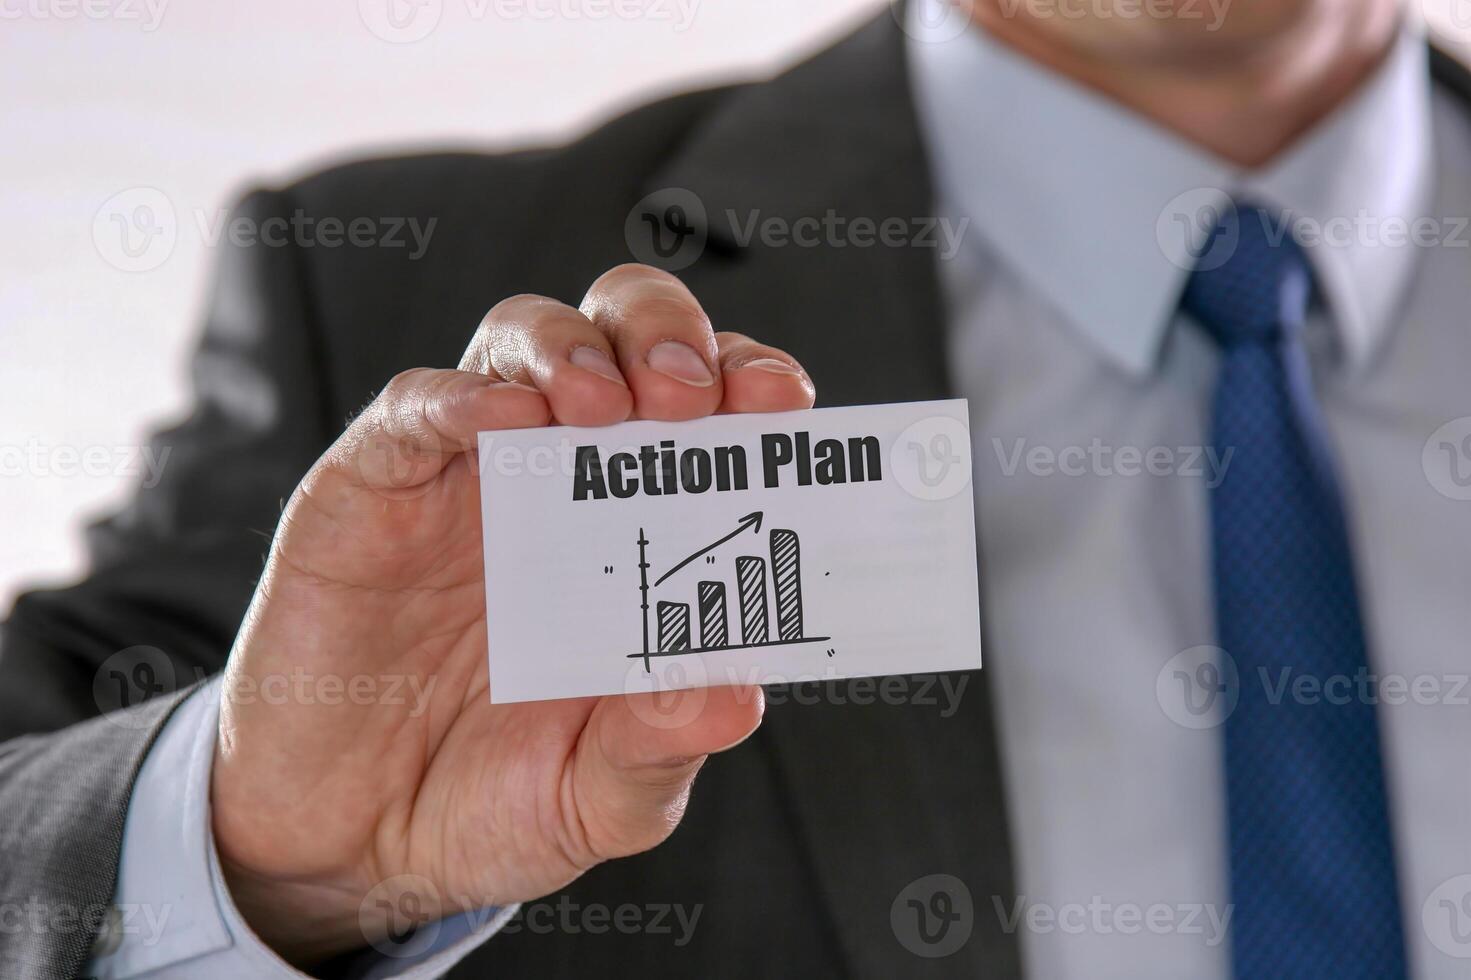 Closeup on businessman holding a card with ACTION PLAN rising arrow and chart, business concept photo